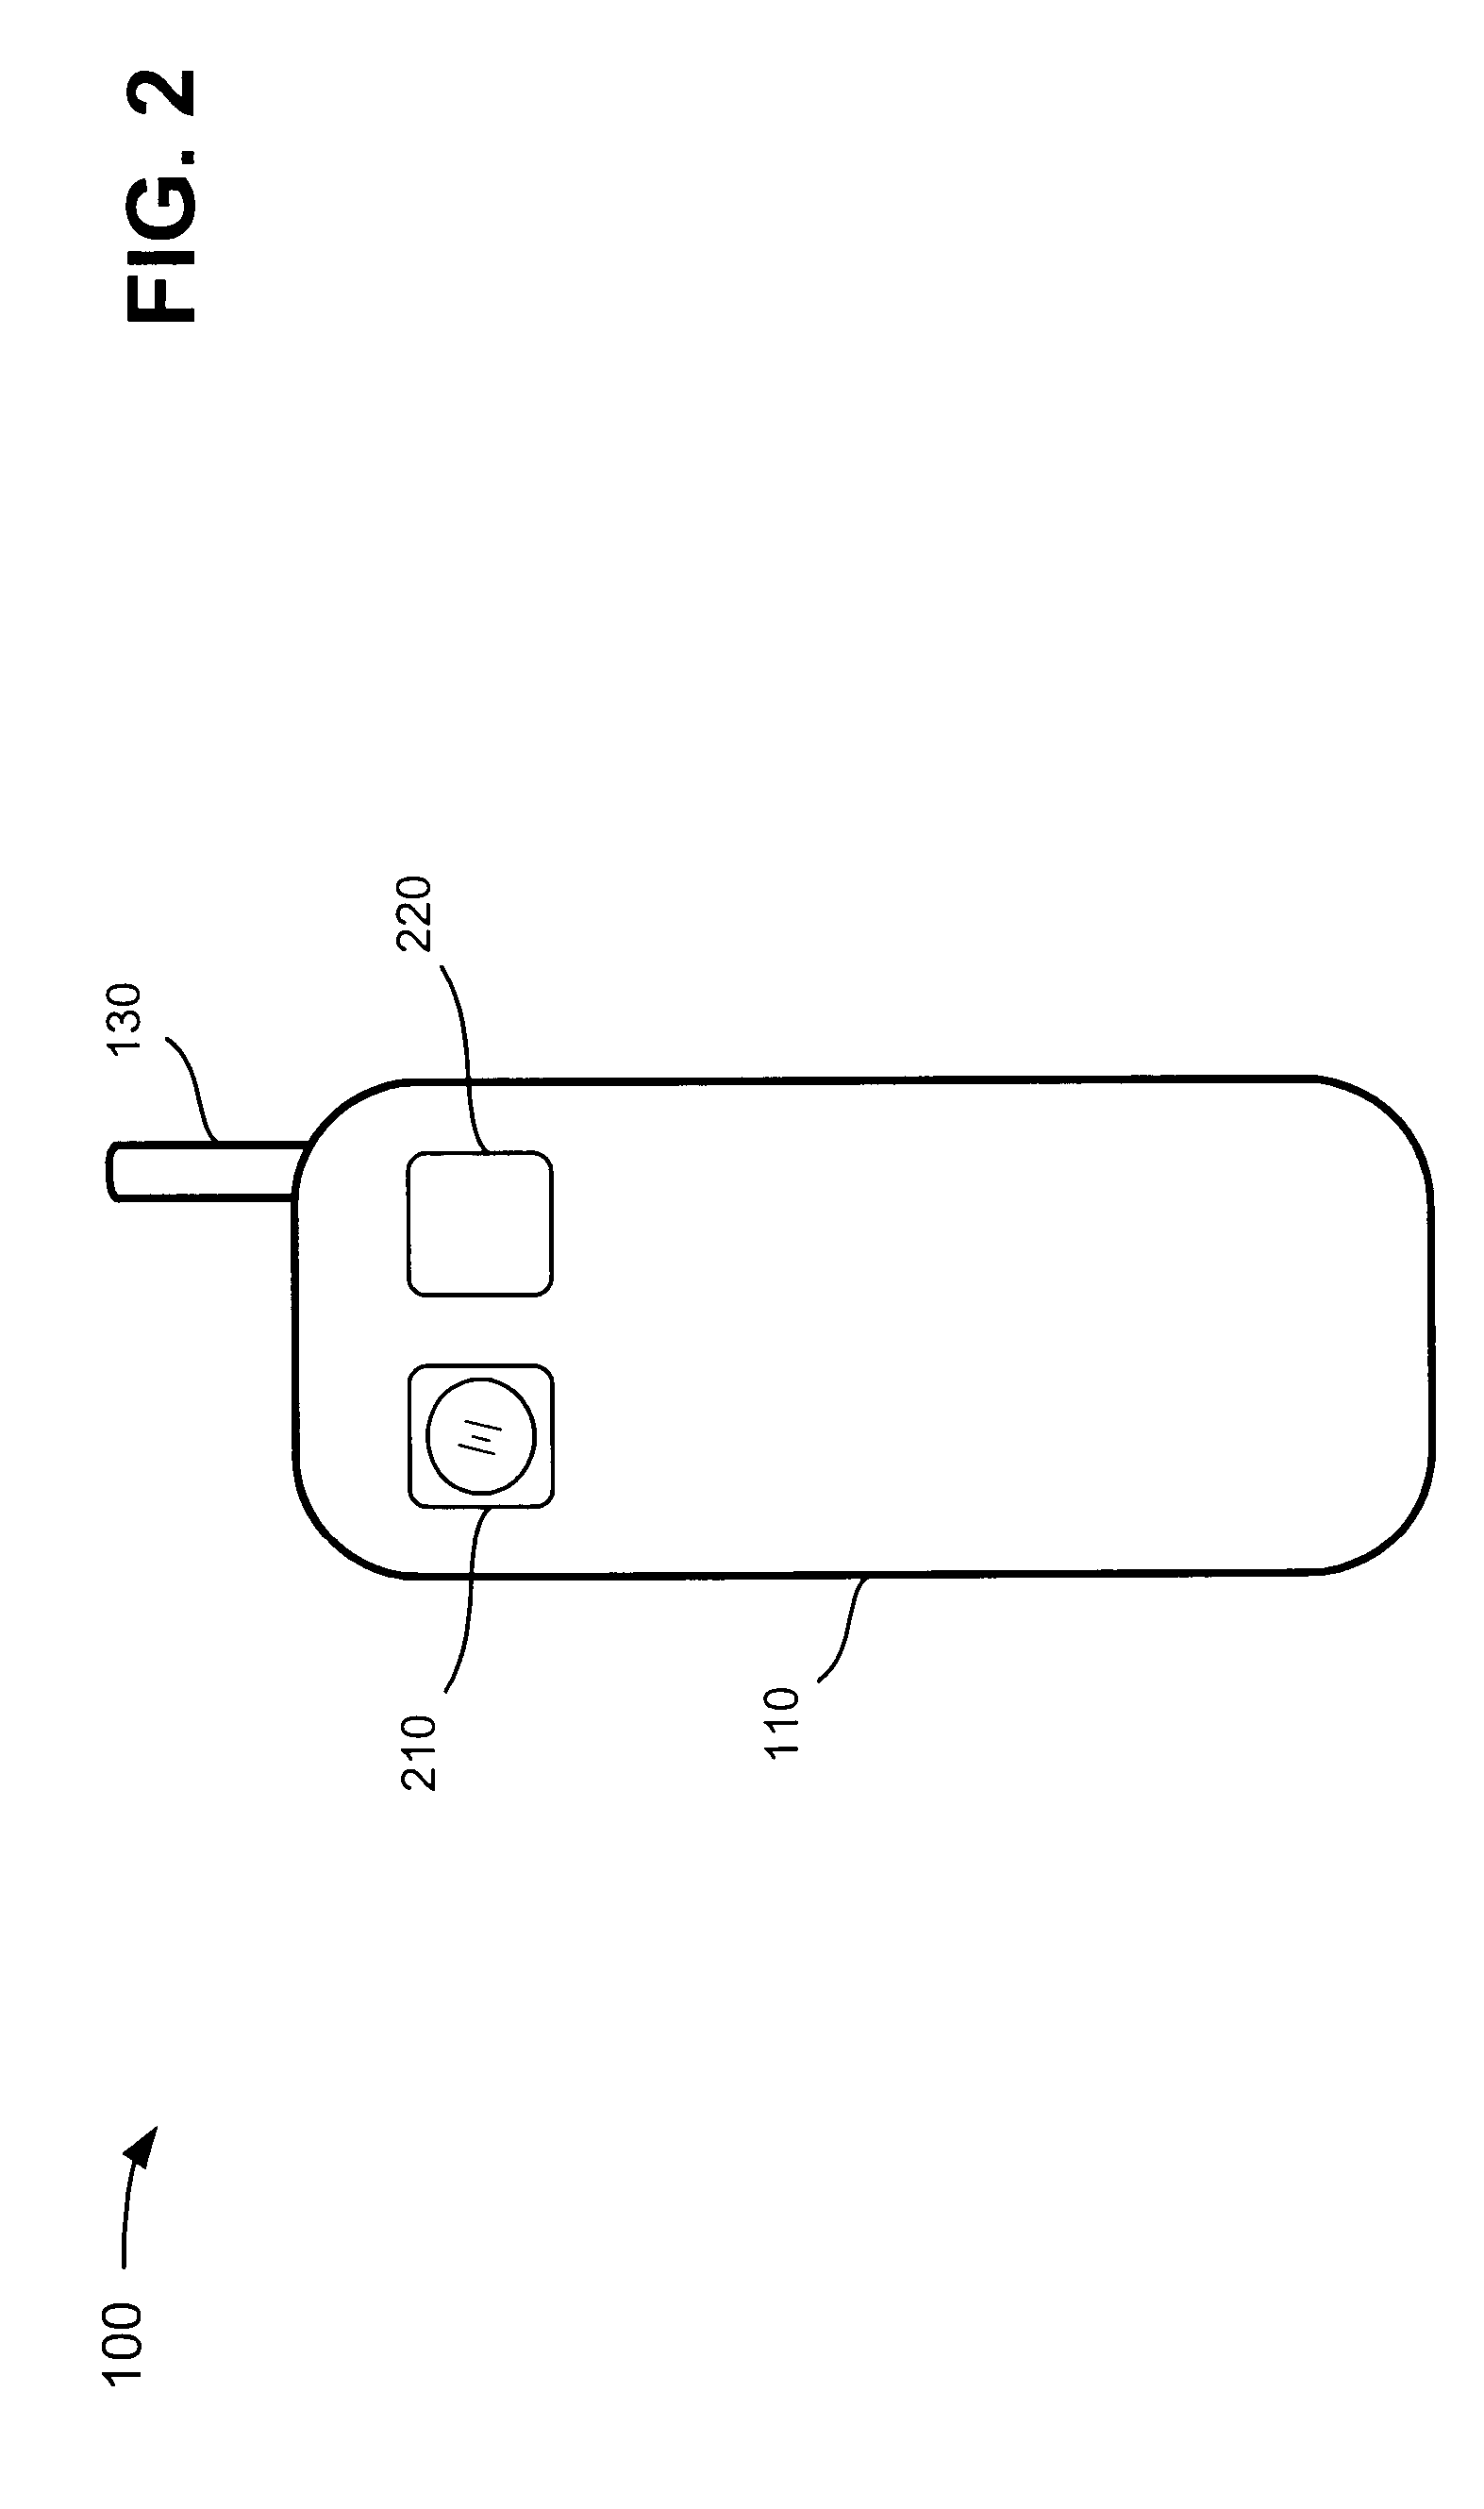 Bar code input for camera-equipped wireless devices